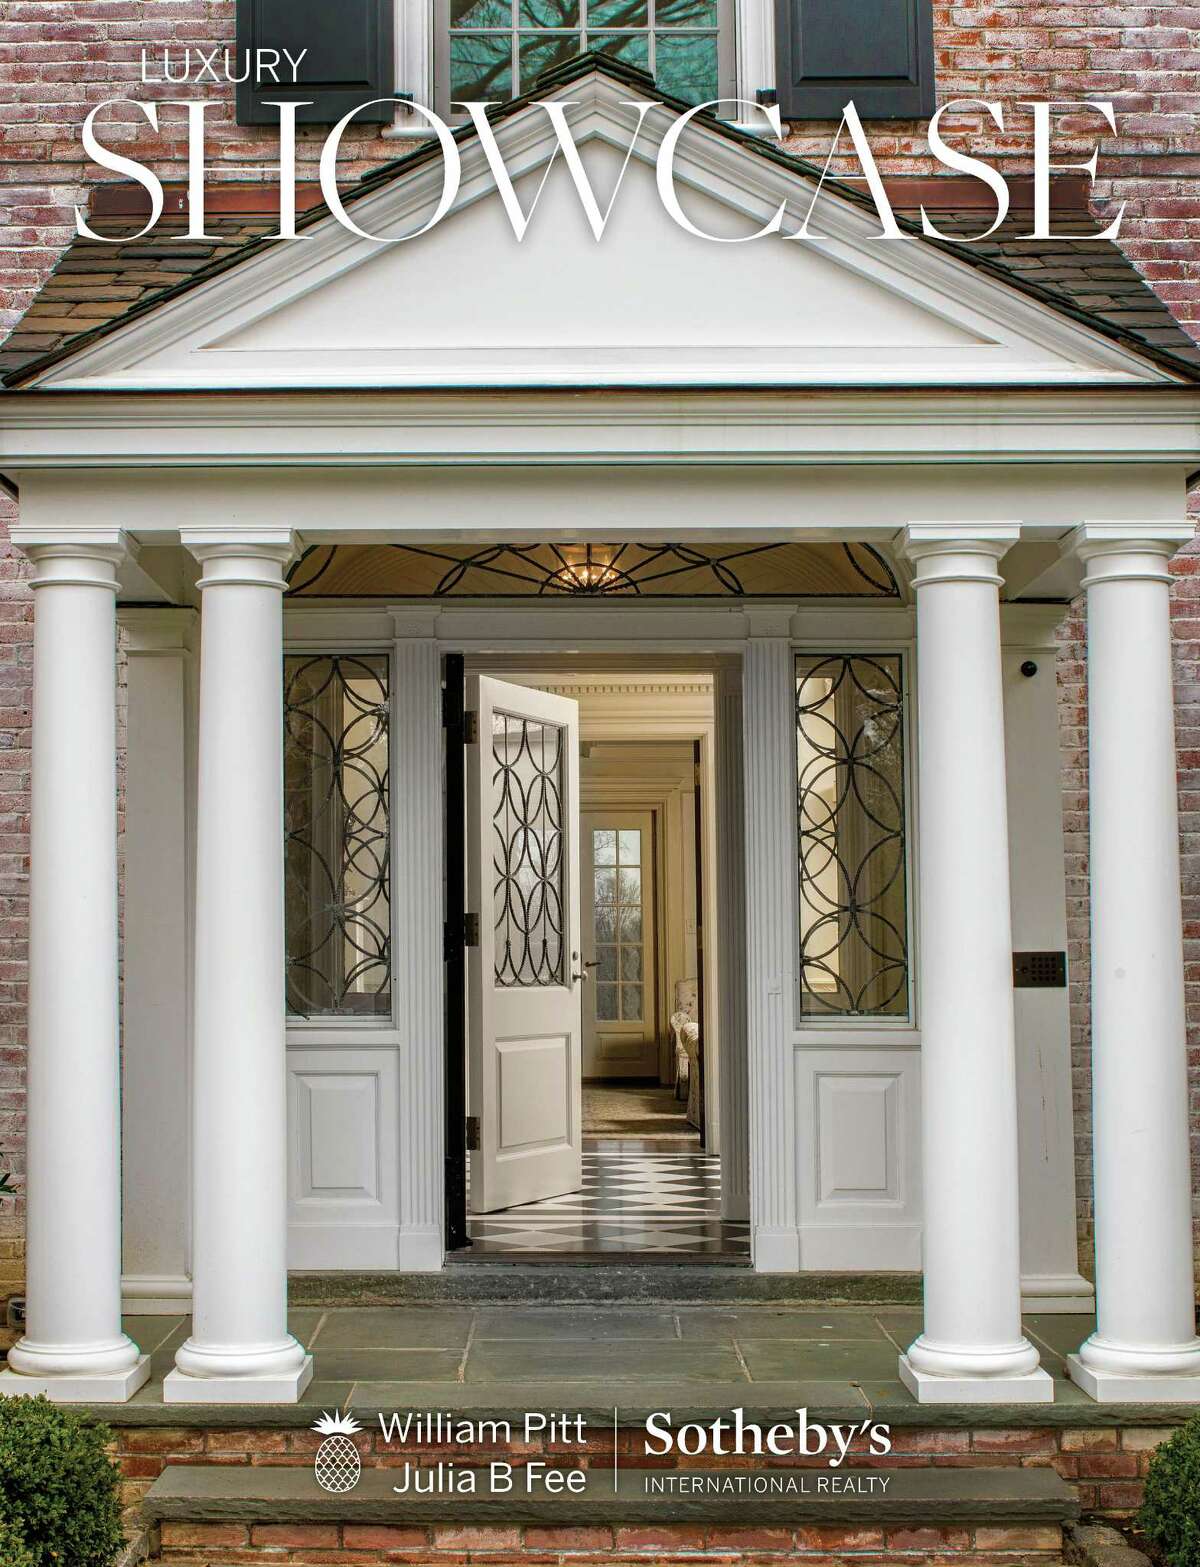 Luxury Showcase is a new magazine released by William Pitt and Julia B. Fee Sothebyís International Realty, which has offices in Fairfield, Litchfield and New Haven counties.